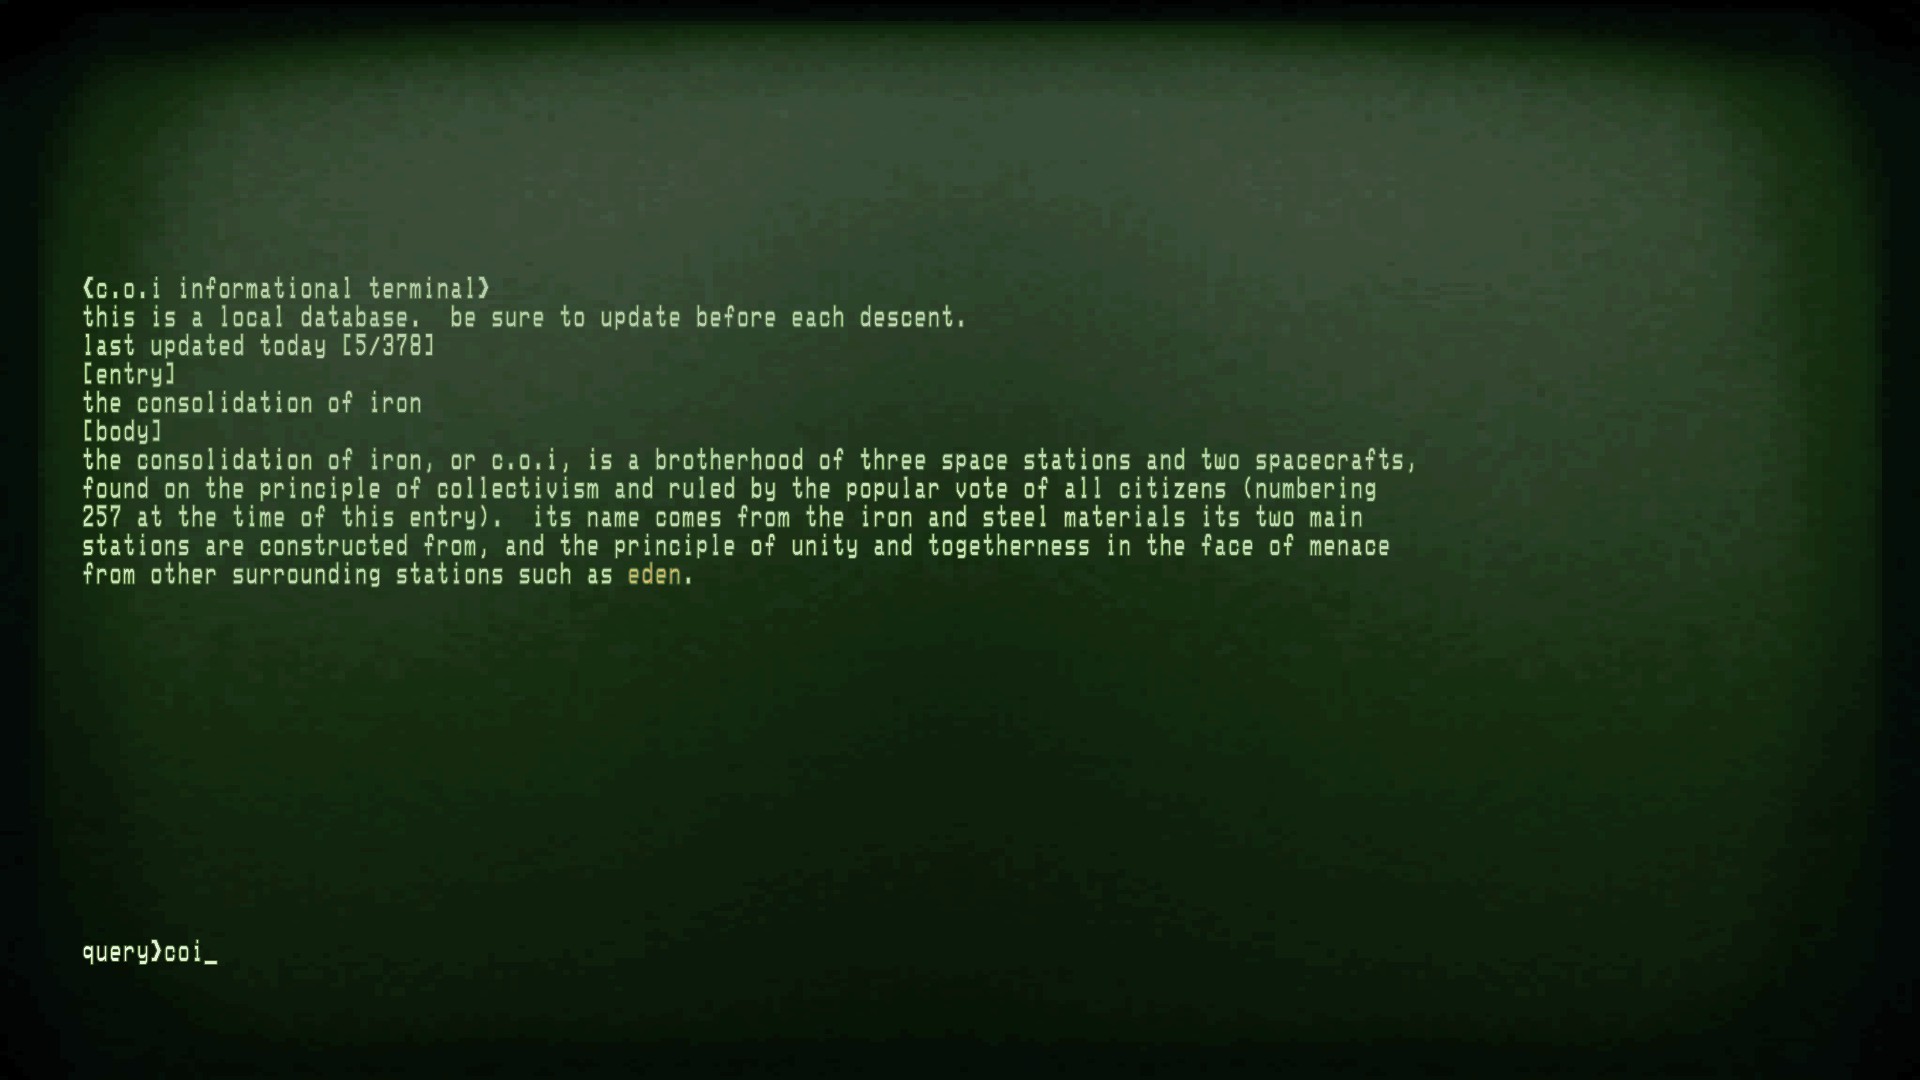 Game Lore -- The C.O.I Informational Terminal Commands image 5